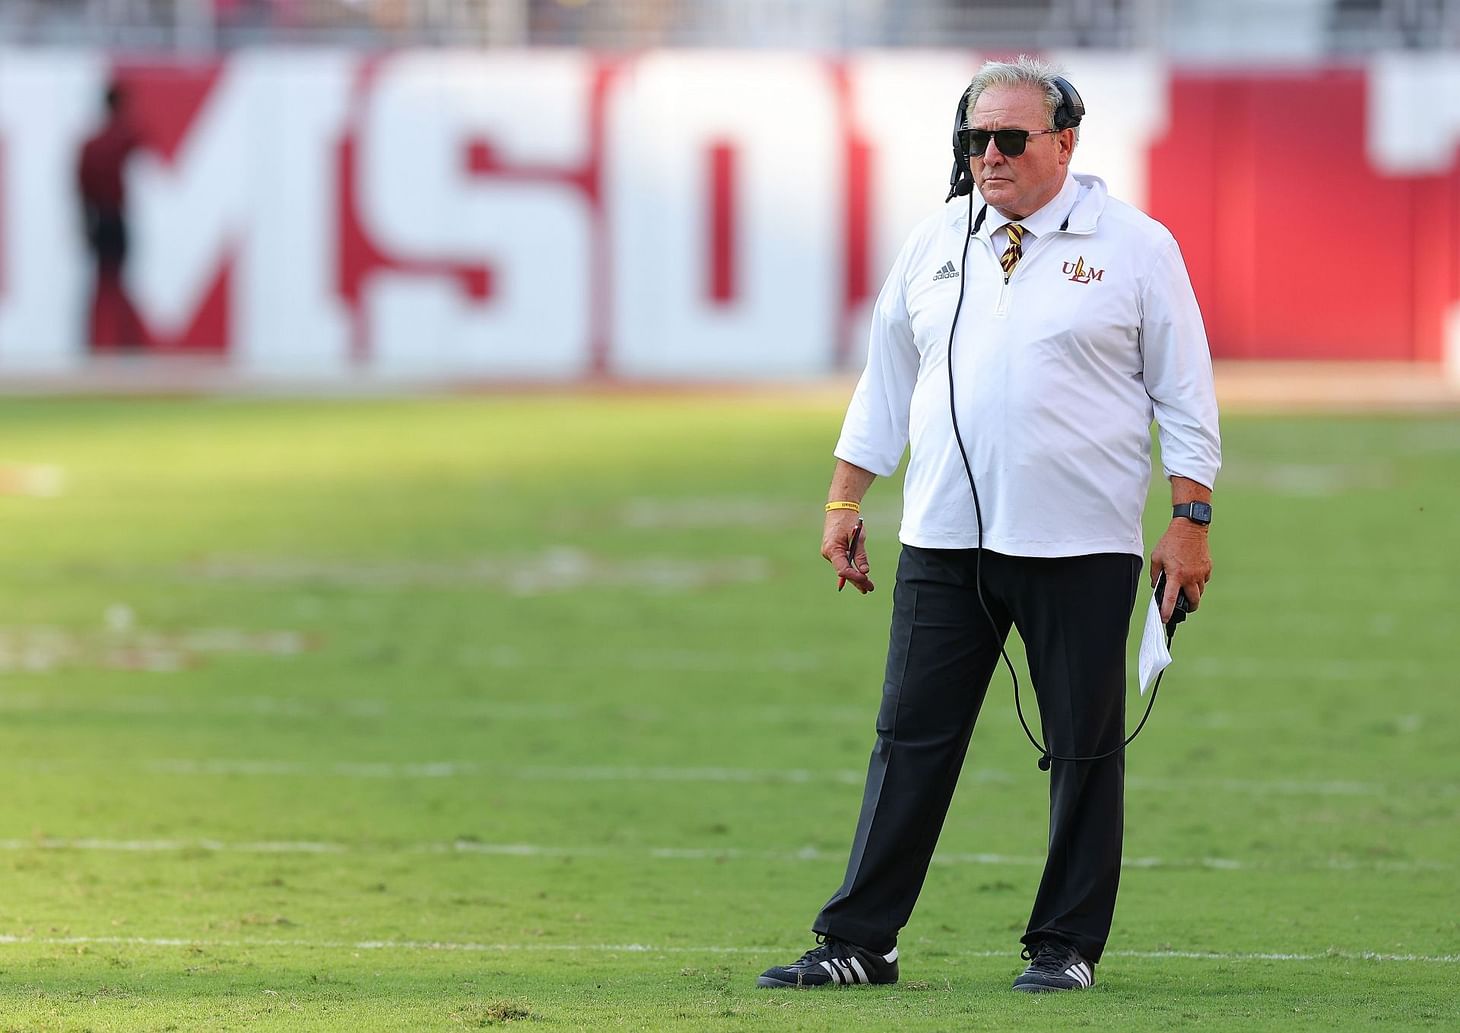 Top 5 oldest college football coaches feat. Nick Saban